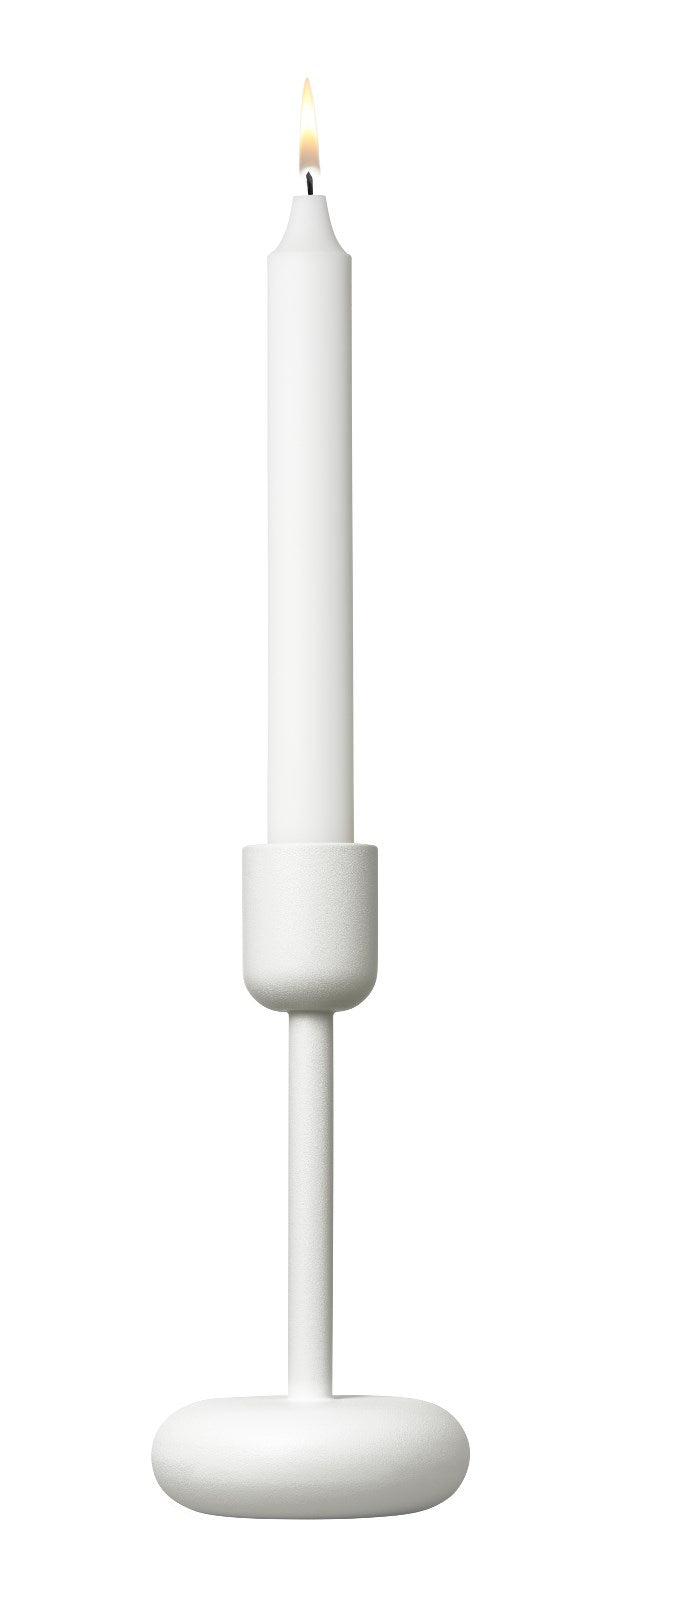 media image for Nappula Candleholder in Various Sizes & Colors design by Matti Klenell for Iittala 220